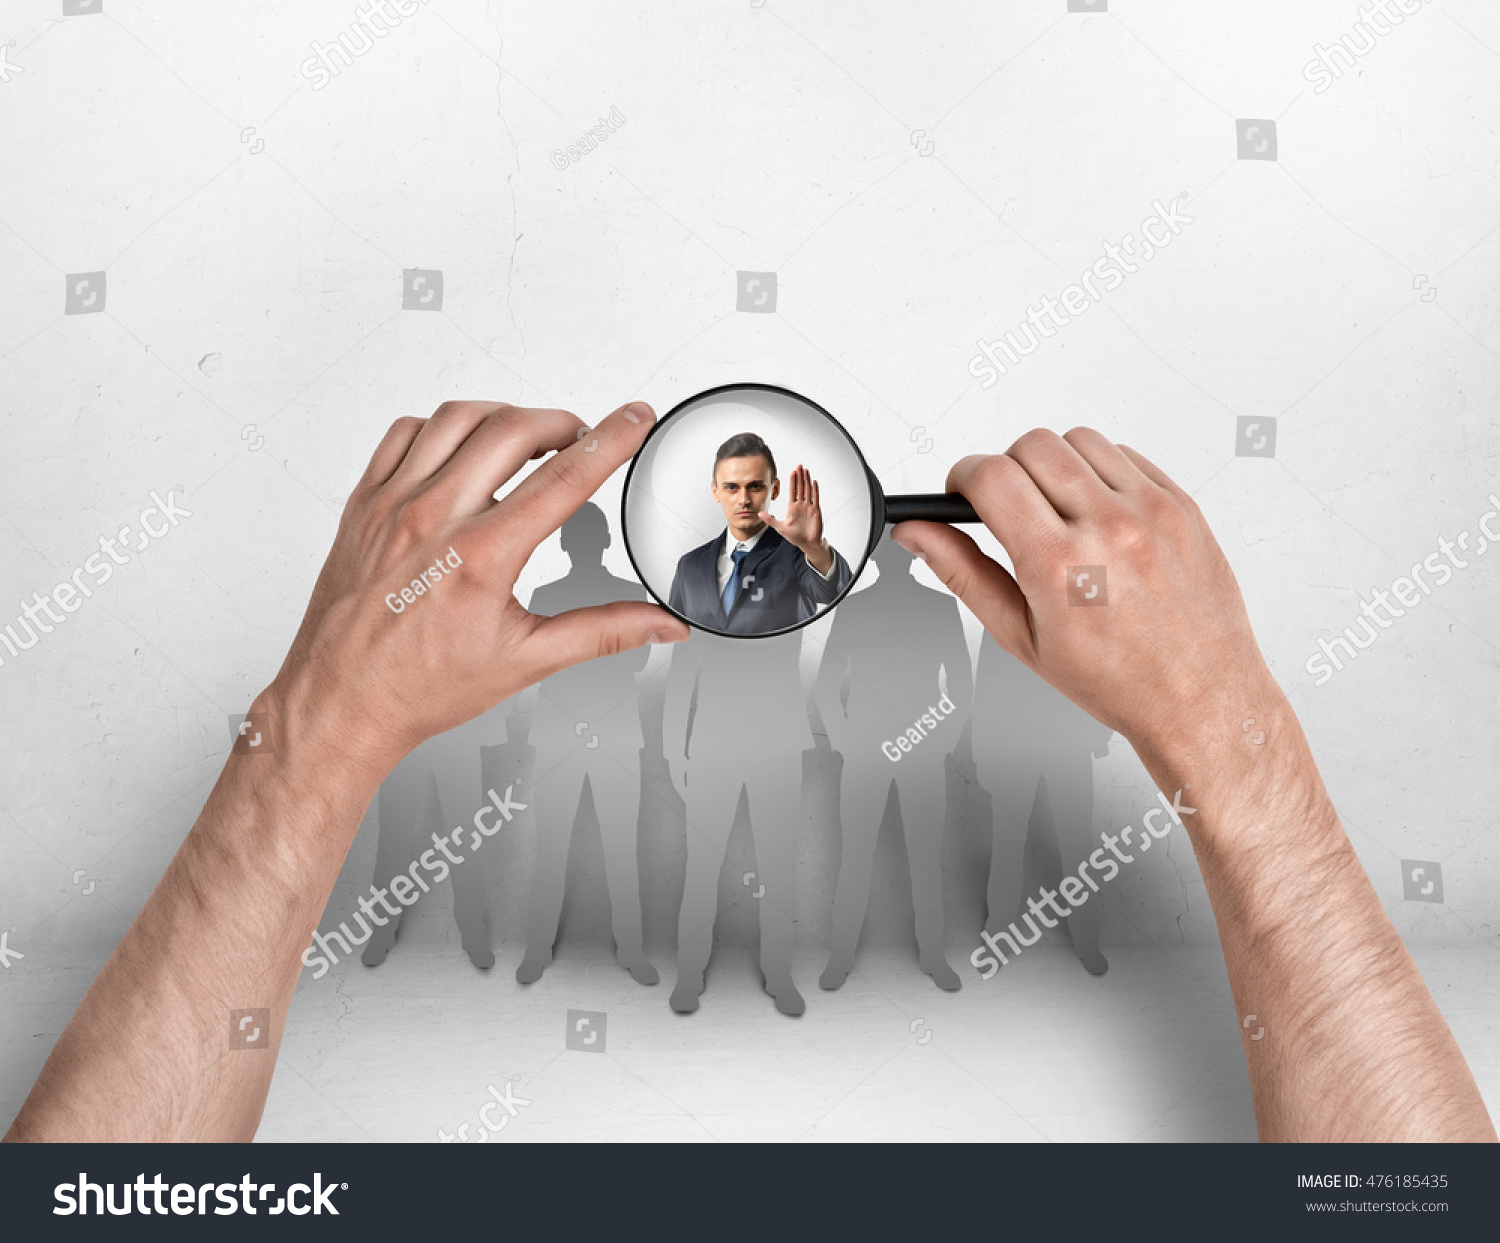 Close-up view of a man's hands focusing magnifier on a businessman with his hand raised. Body language. Stop sign. Employment issues. #476185435